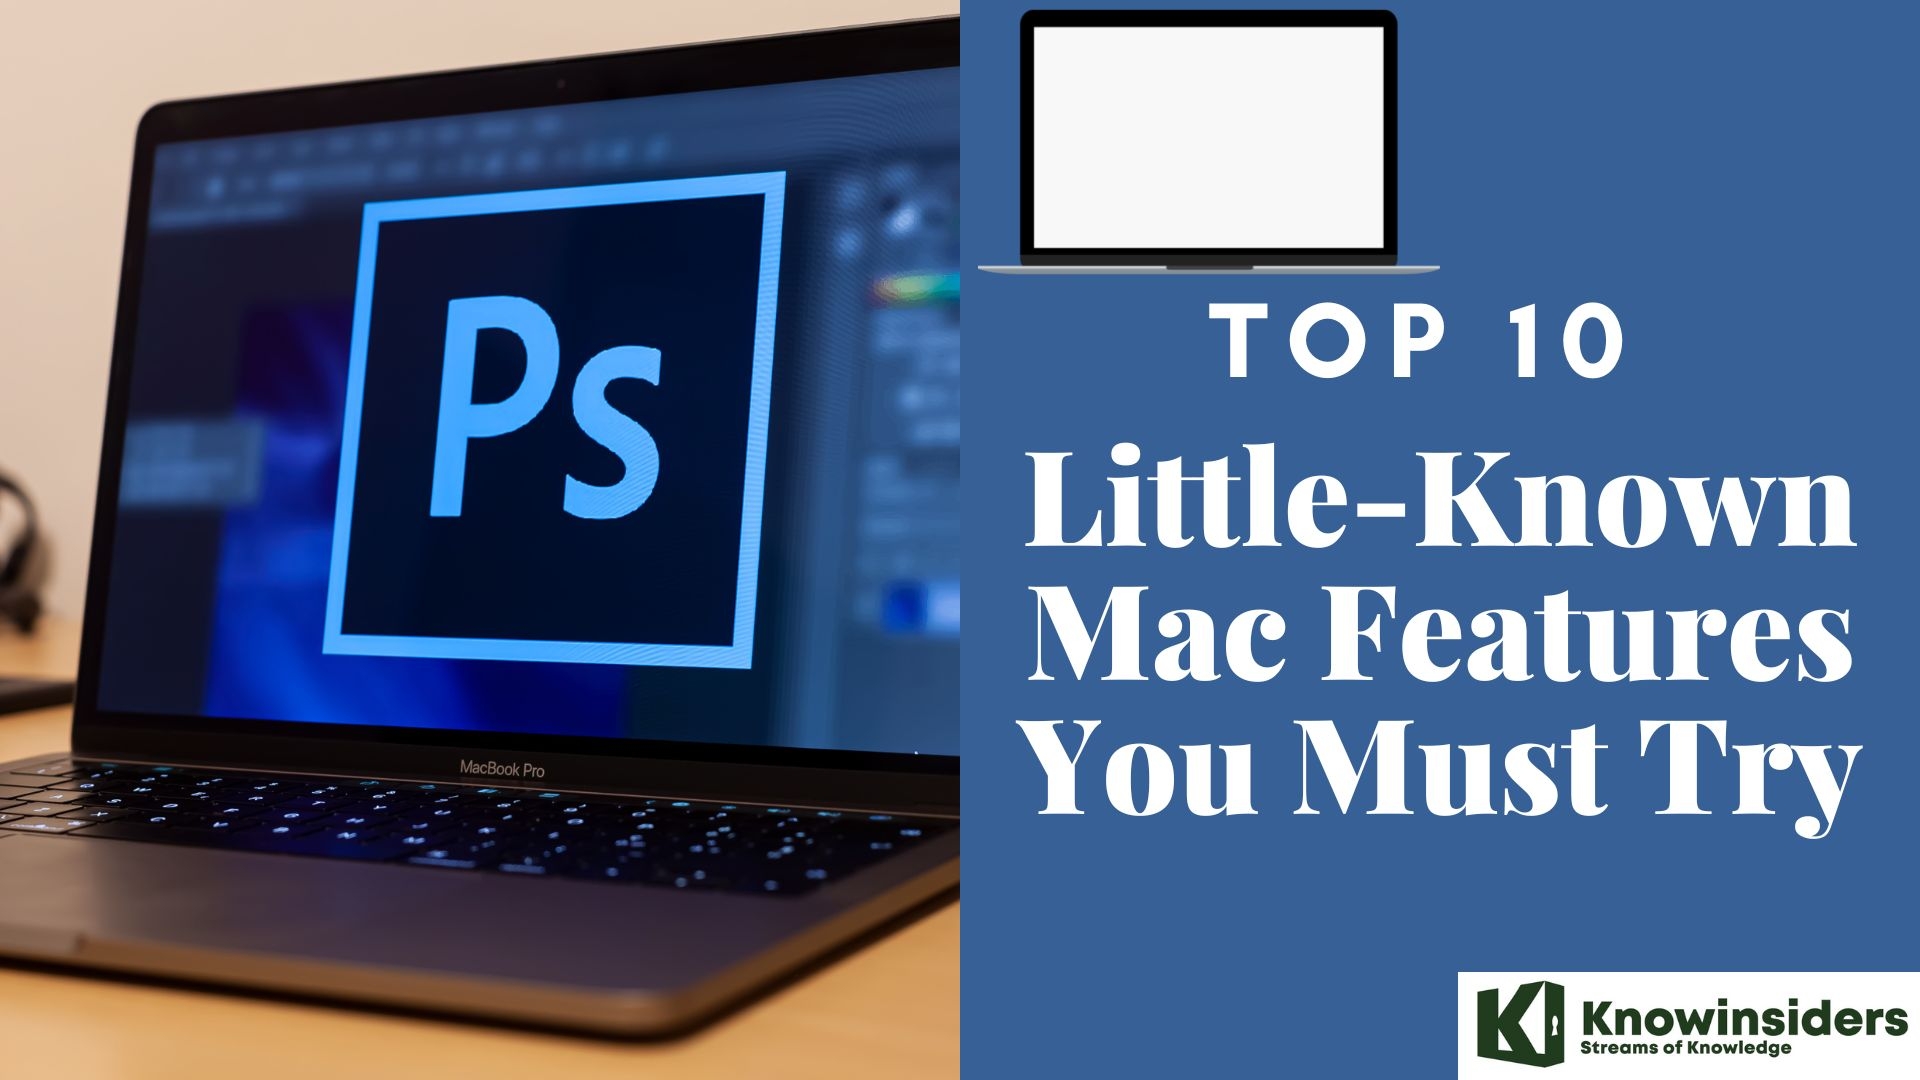 Top 10 Little-Known Mac Features You Must Try